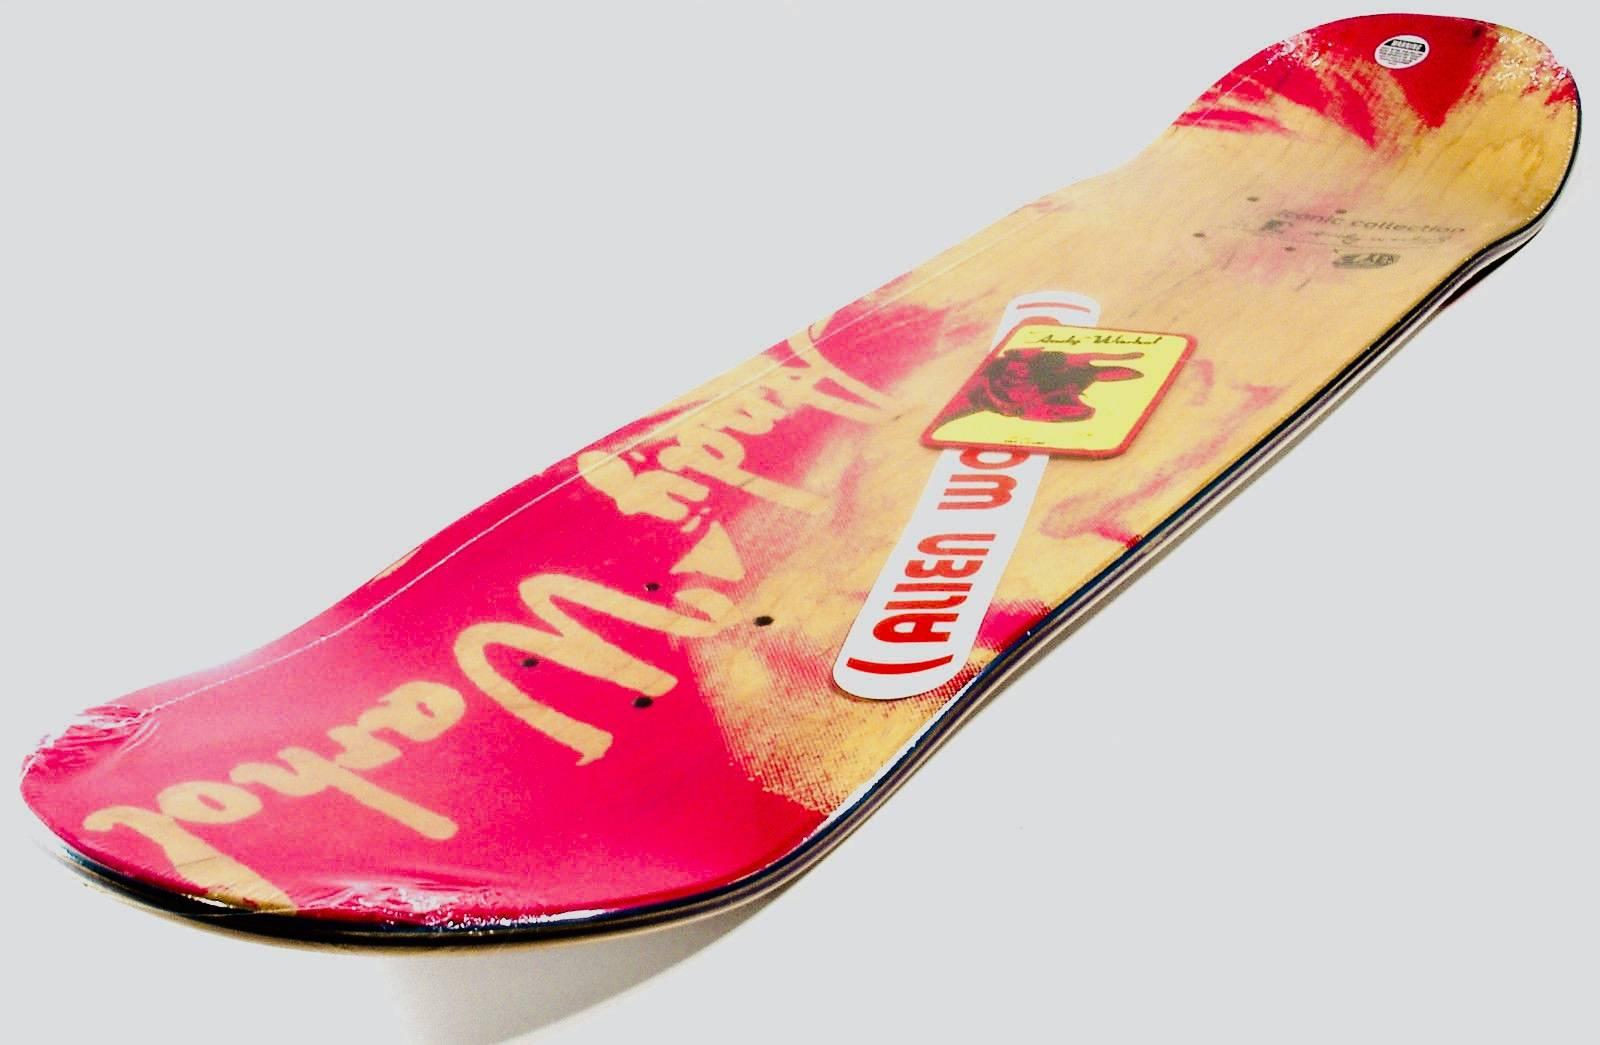 Rare out of print Andy Warhol '15 Minutes of Fame' Skateboard Deck